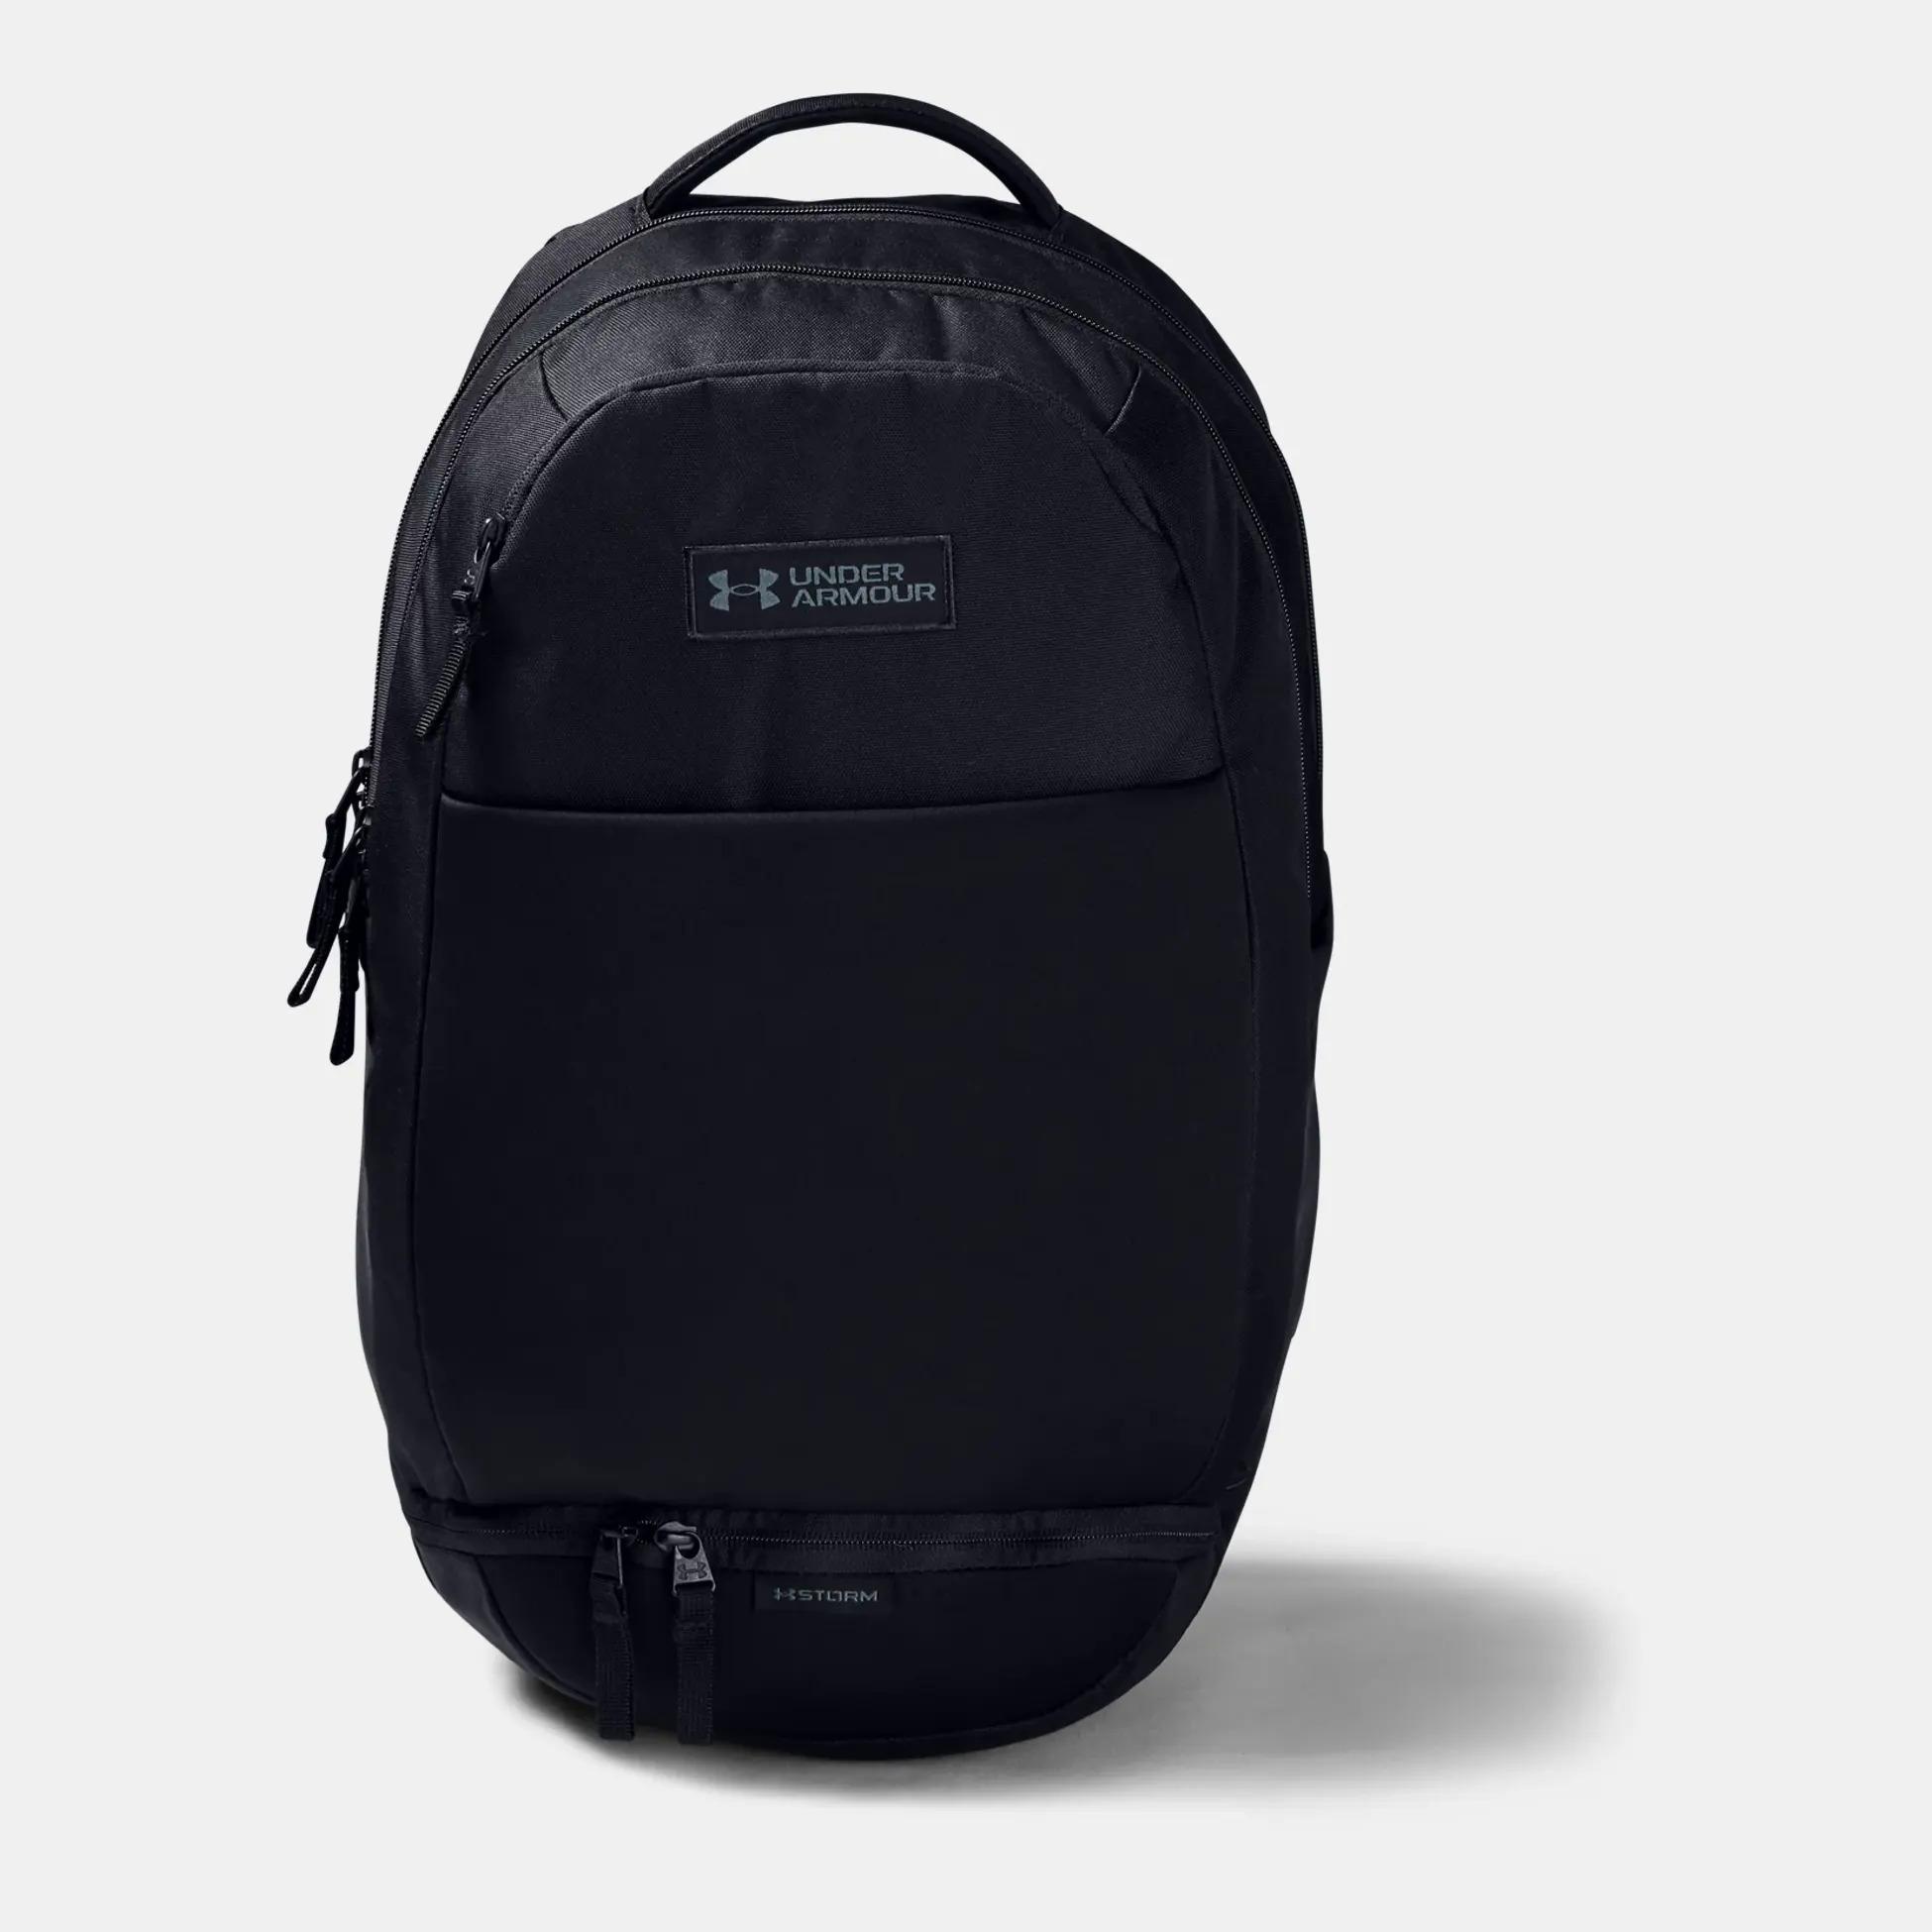 Under Armour Recruit 3.0 Backpack for $24.97 Shipped